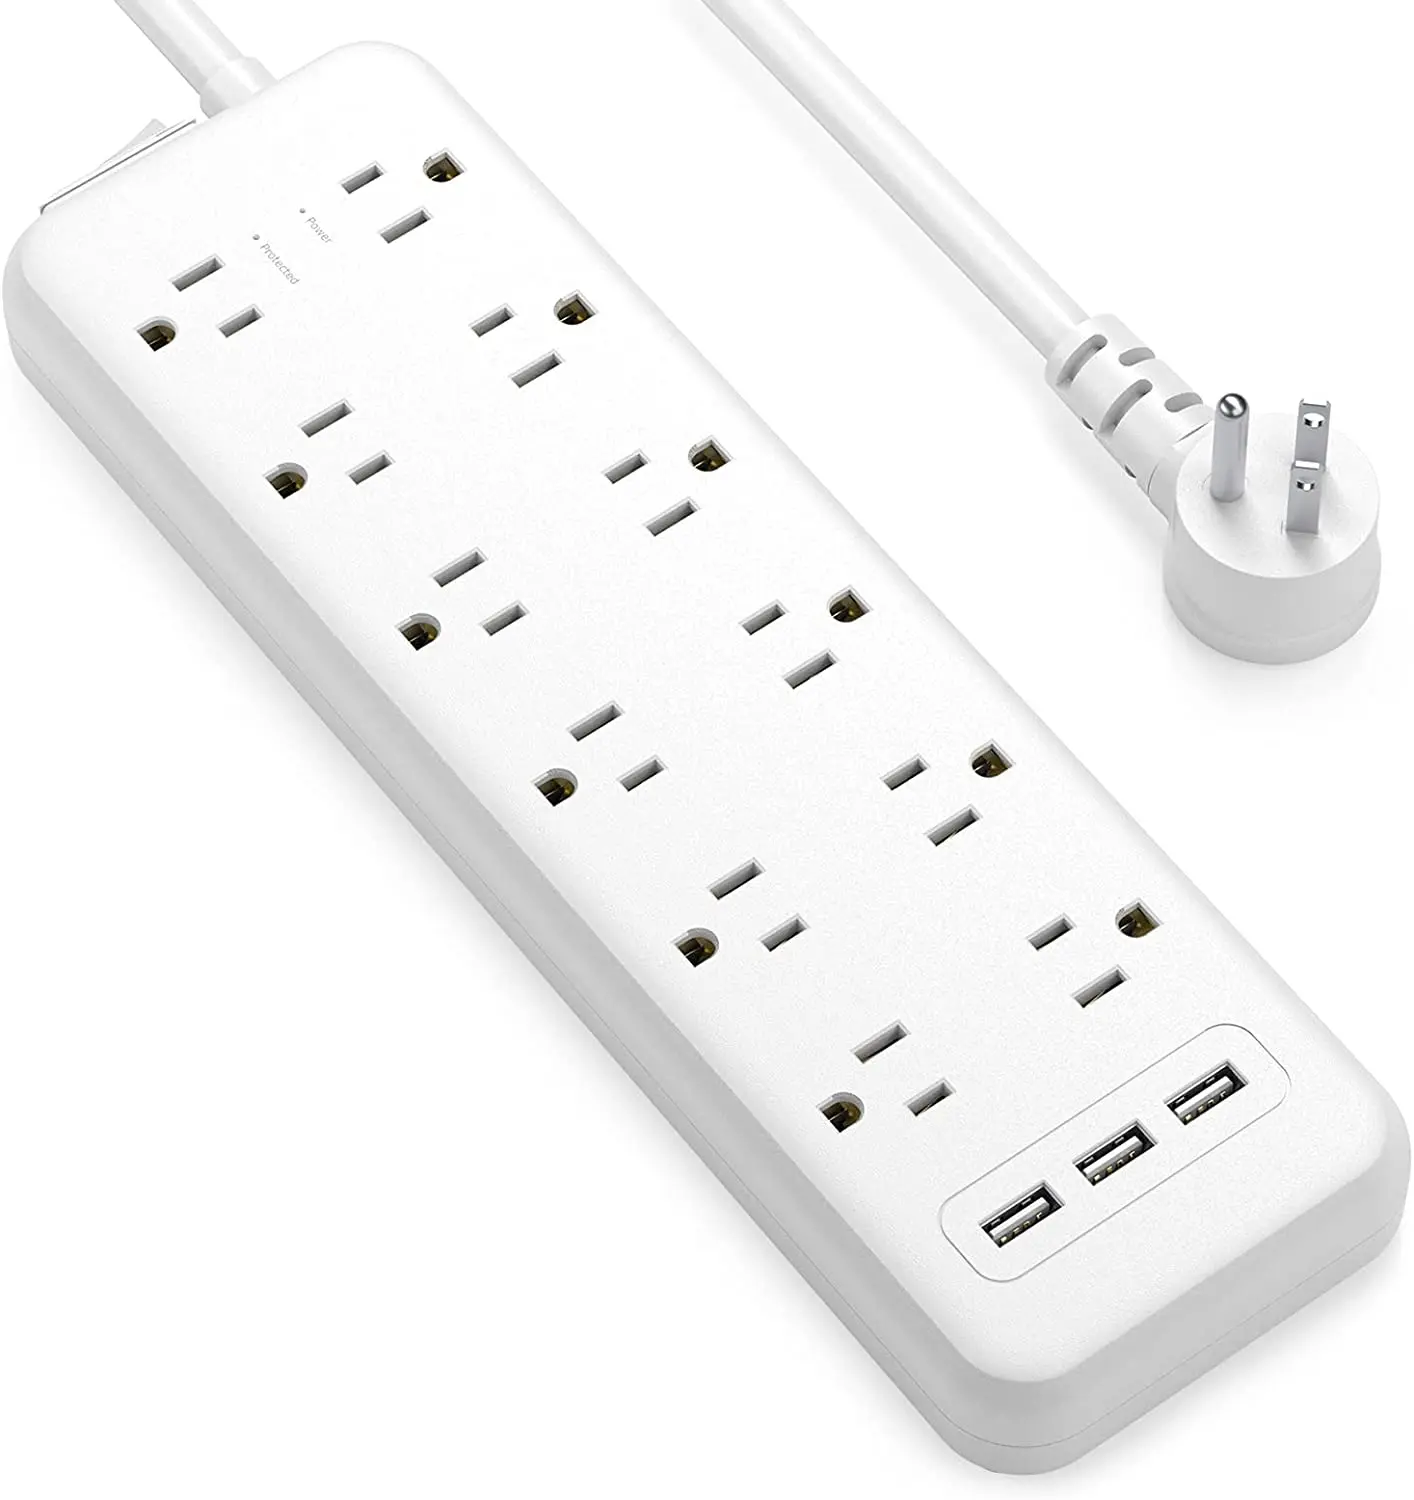 

Power Strip, Surge Protector Flat Plug, 12 Outlets & 3 USB Charging Ports, 1875W/15A 1700J, 6ft Extension Cord, Overload